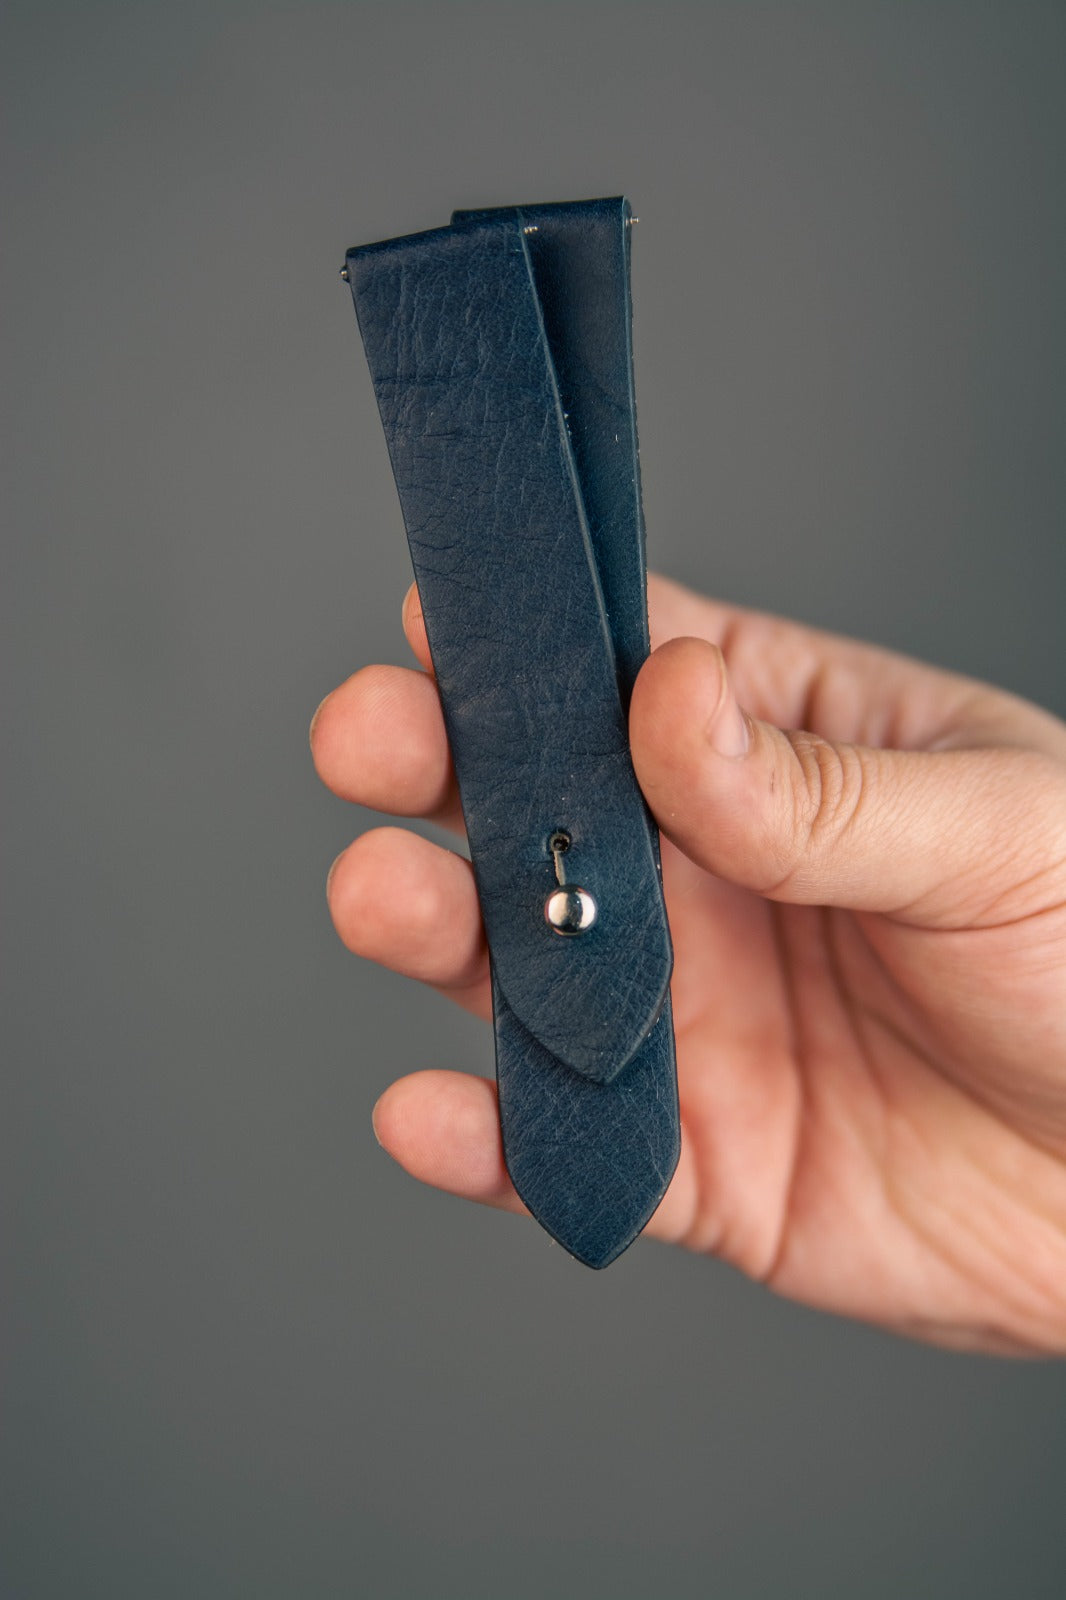 Space Blue Leather Watch Strap - Quick Release Pins - The Hermoso